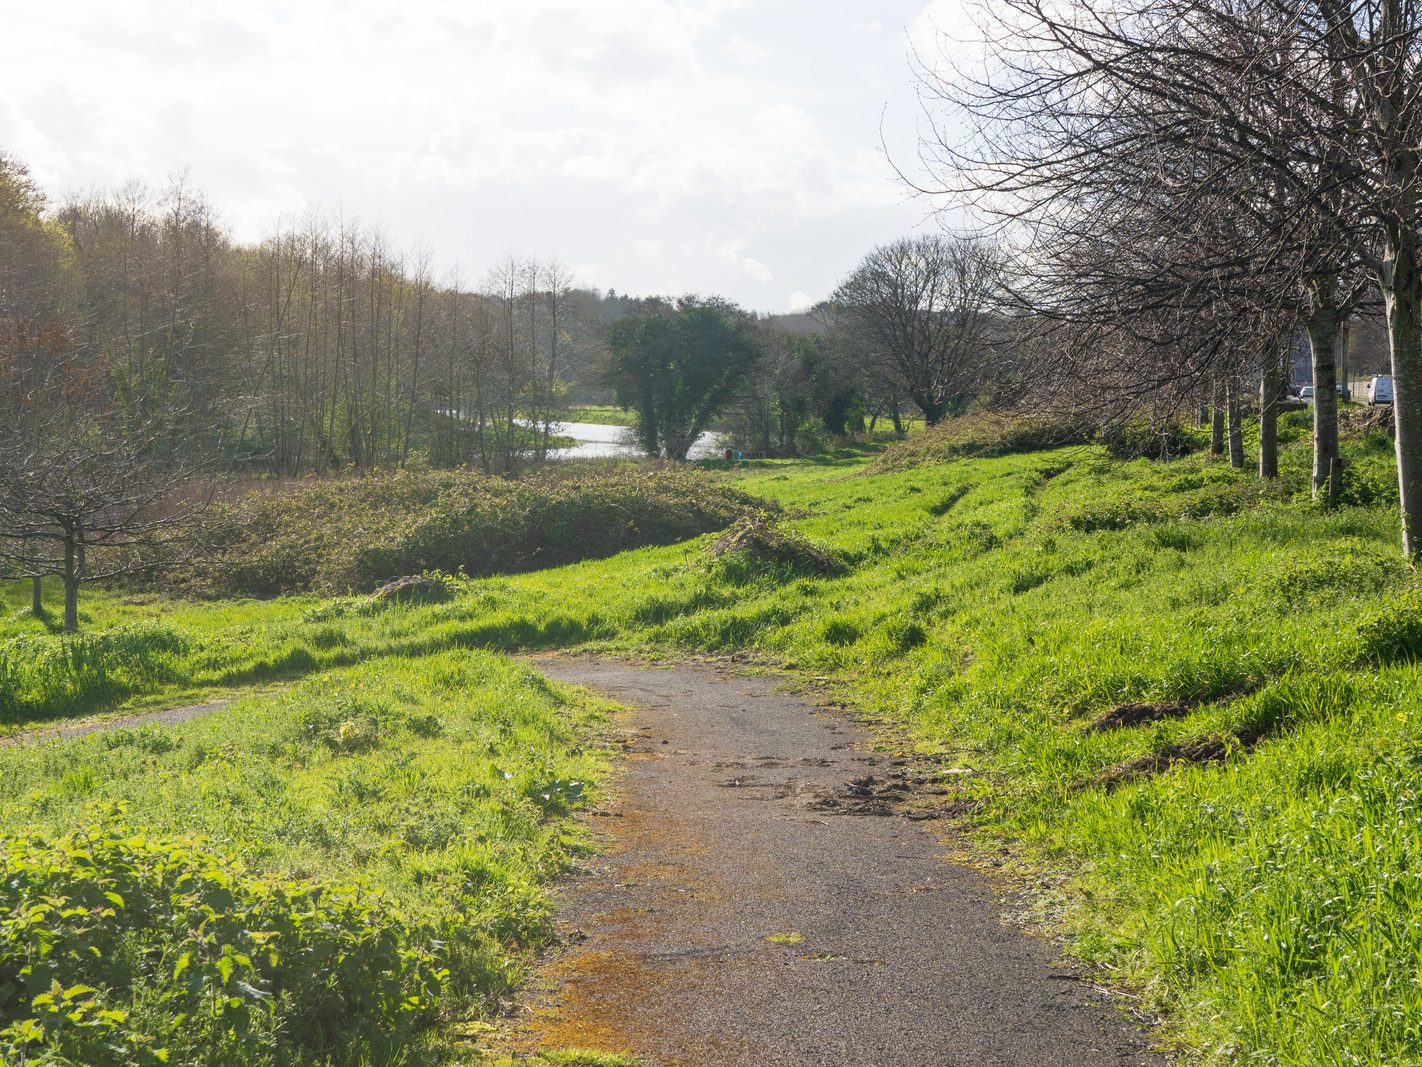 LIFFEY VALLEY PARK AT CHAPELIZOD ON THE NORTH SIDE OF THE RIVER [ACROSS THE ROAD FROM THE ENTRANCE TO PHOENIX PARK]-223349-1